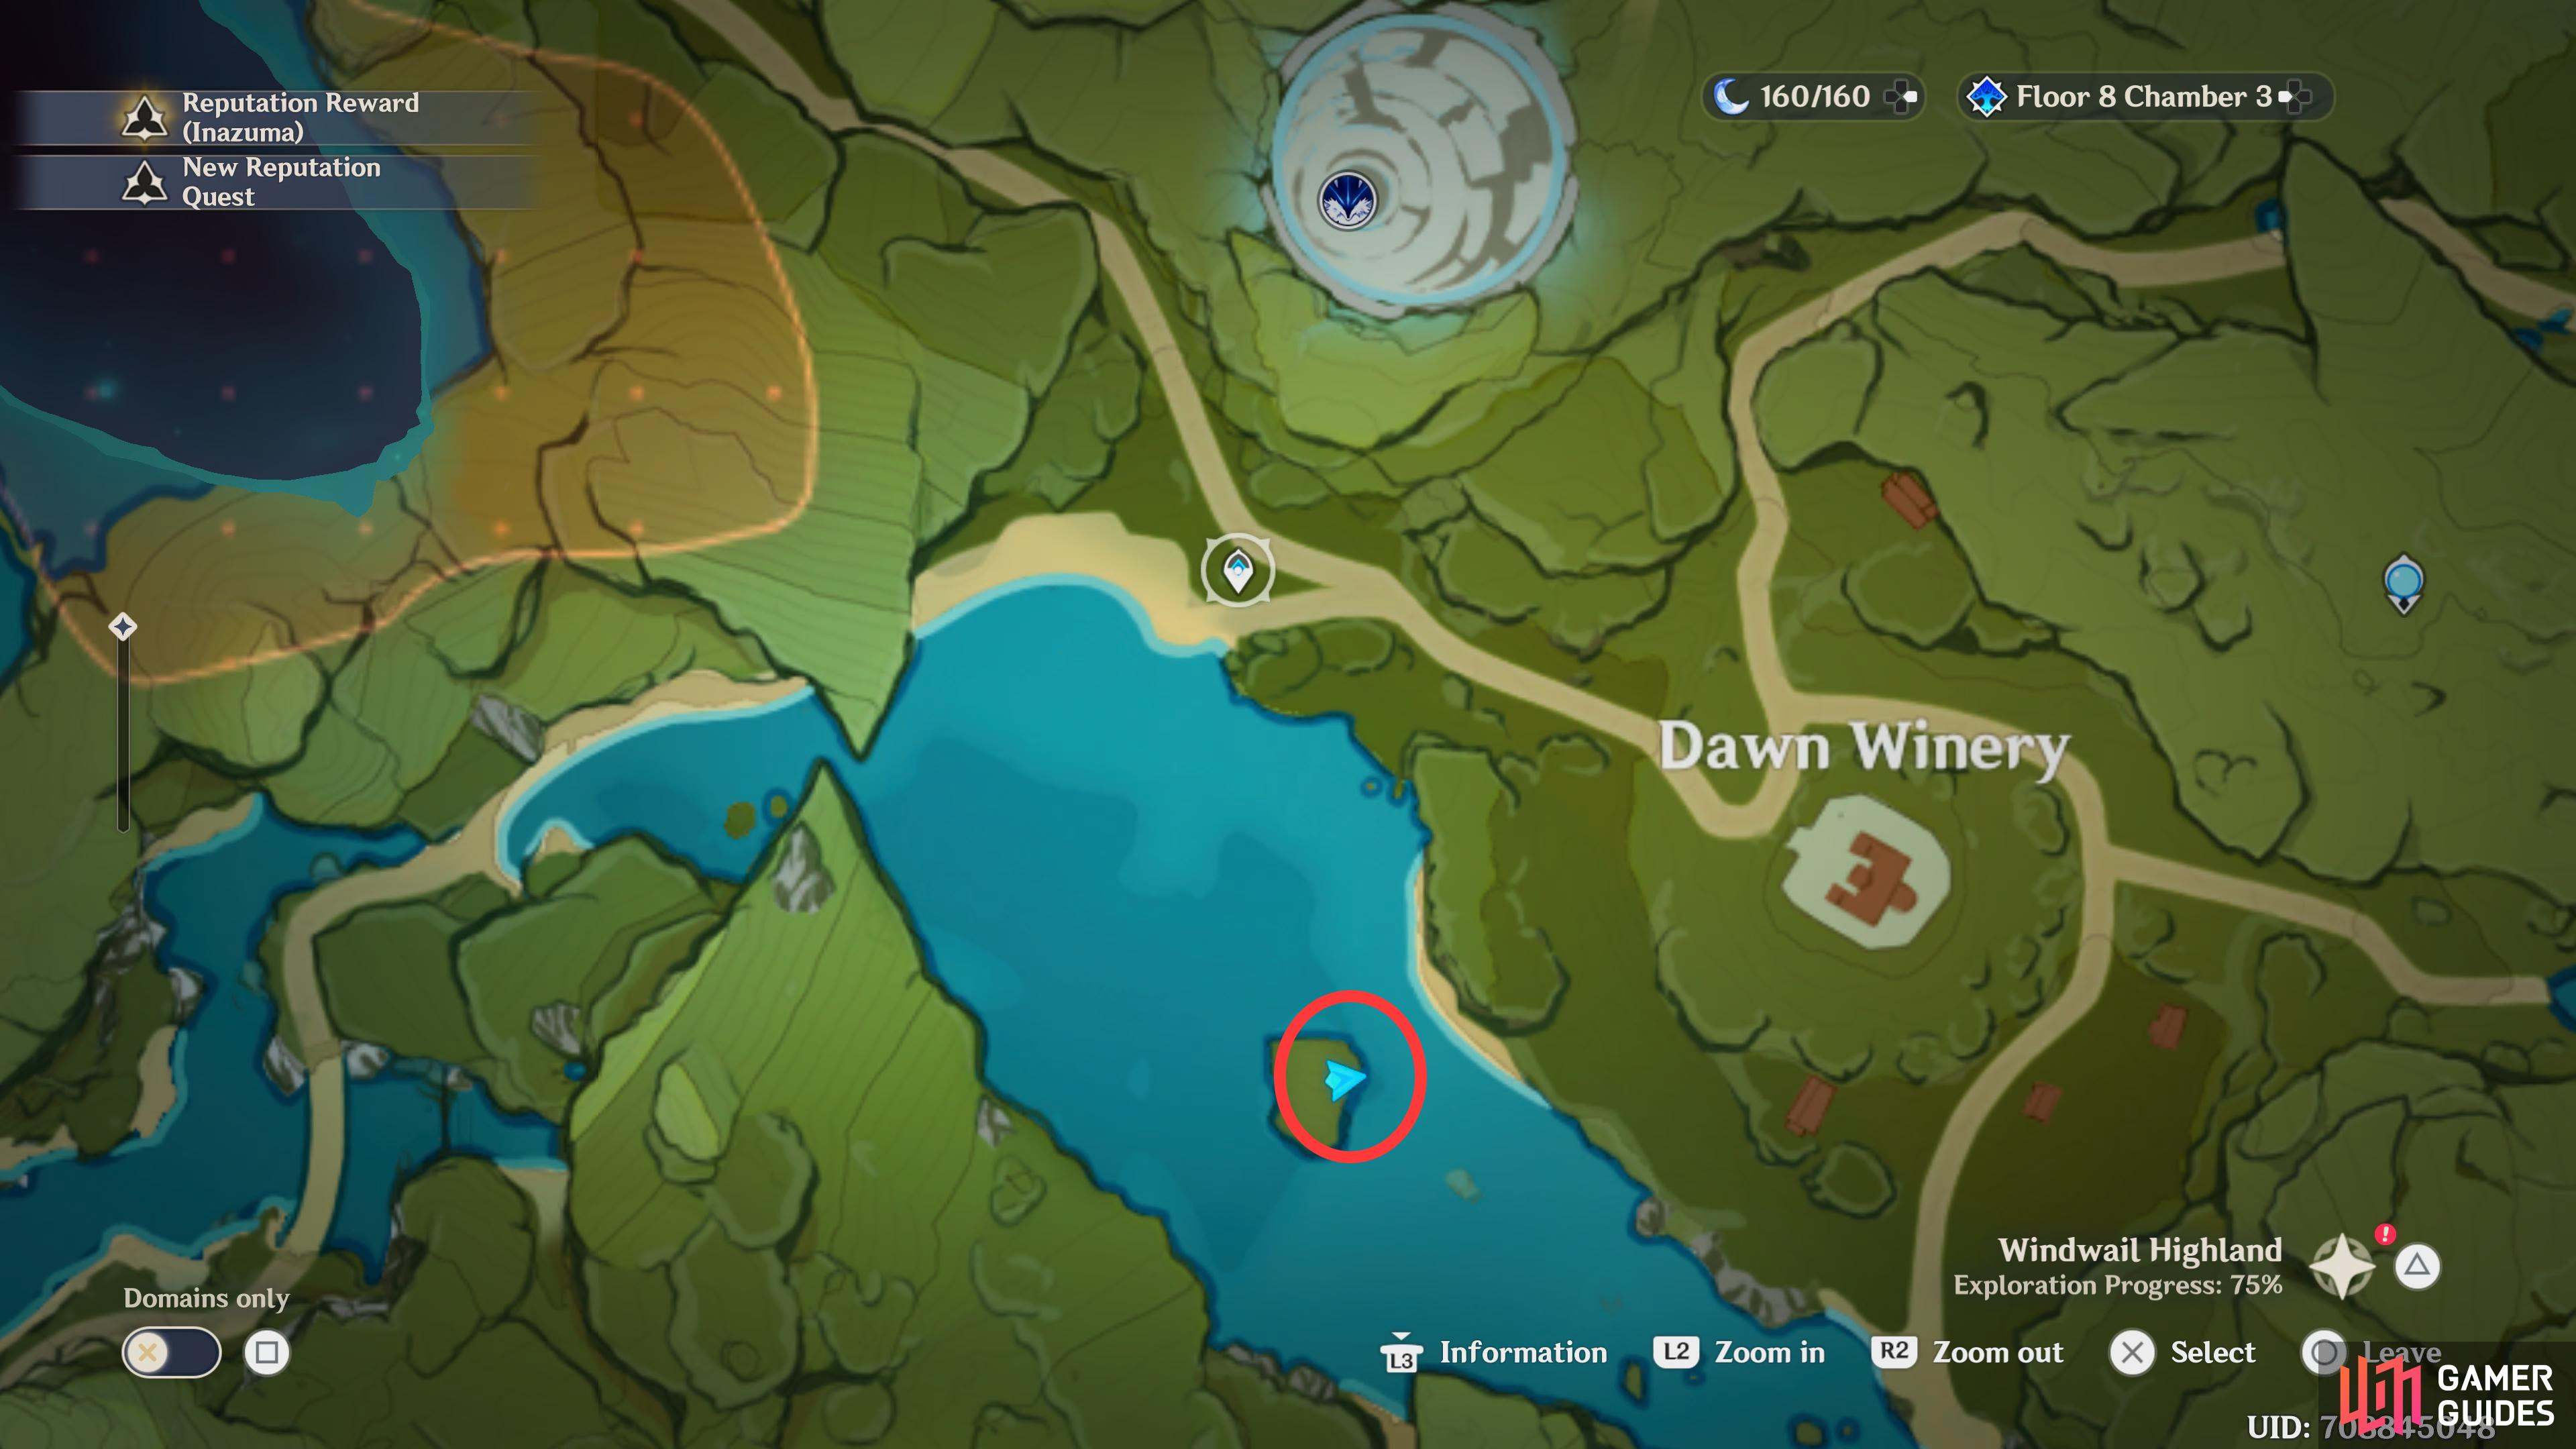 The West Dawn Winery Fishing Point is on the small island west/southwest of the Dawn Winery.